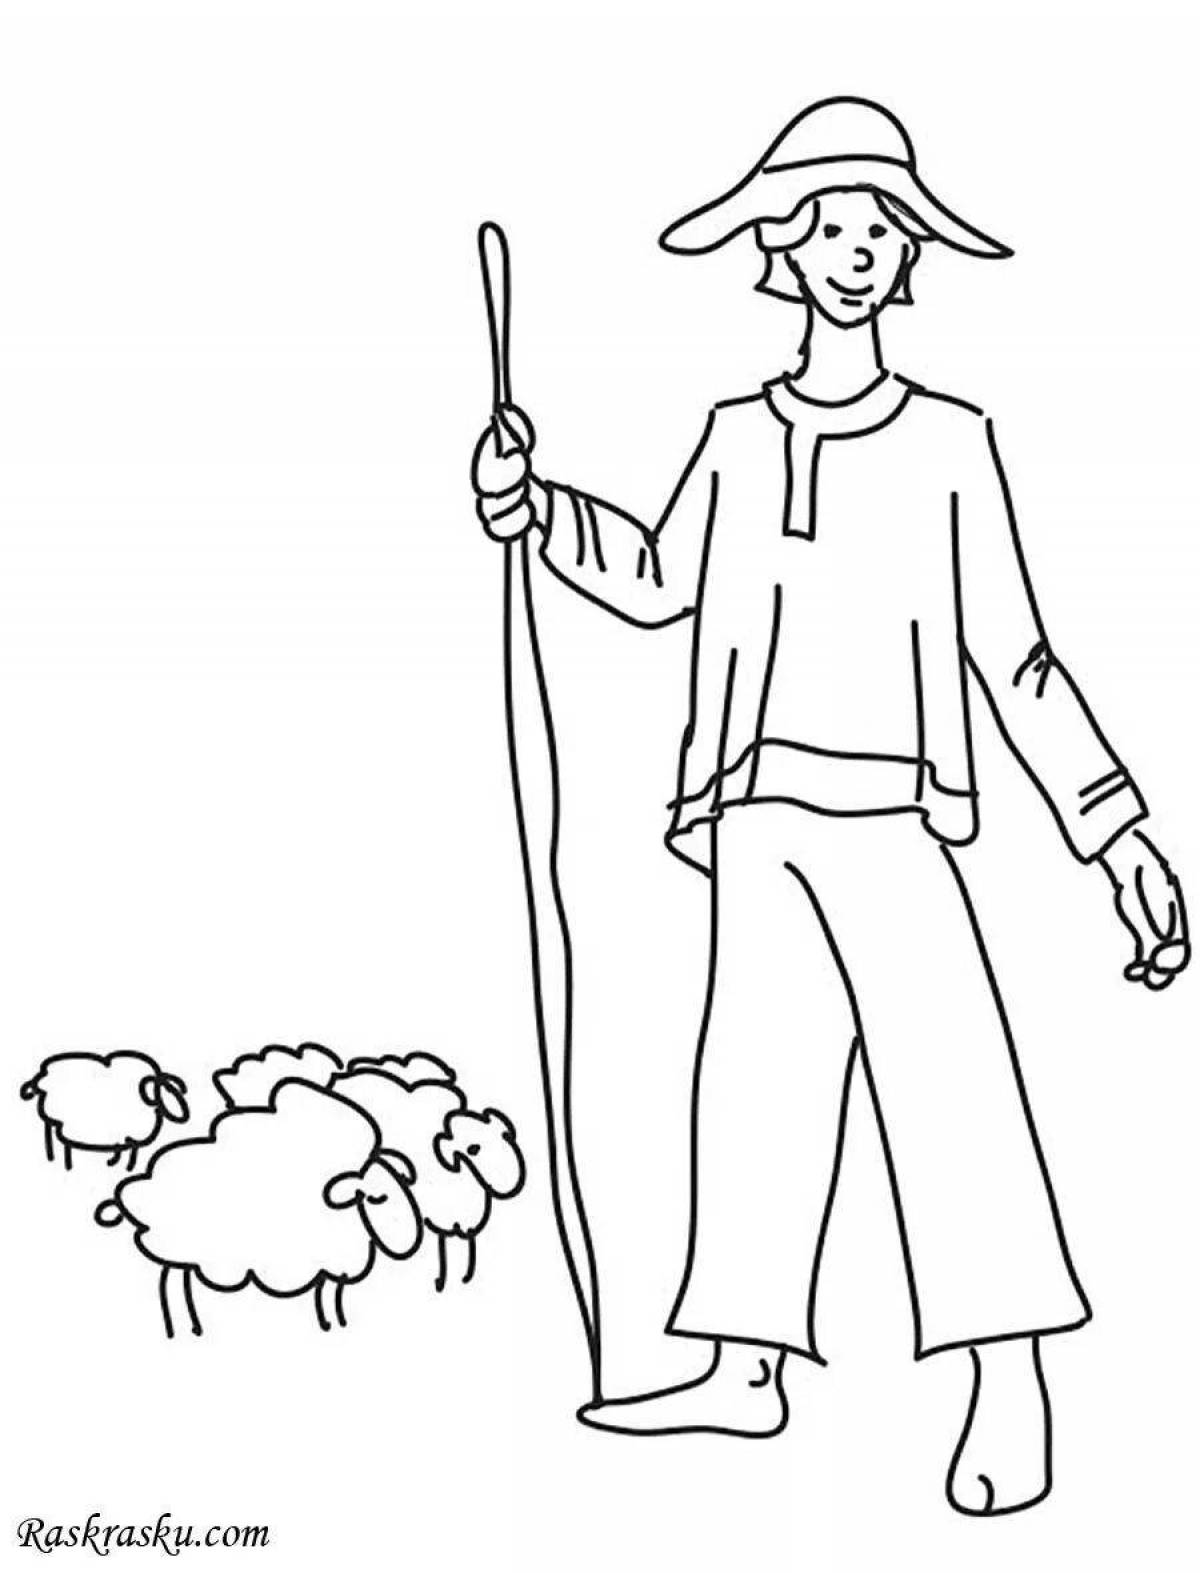 Colorful peasant labor coloring page